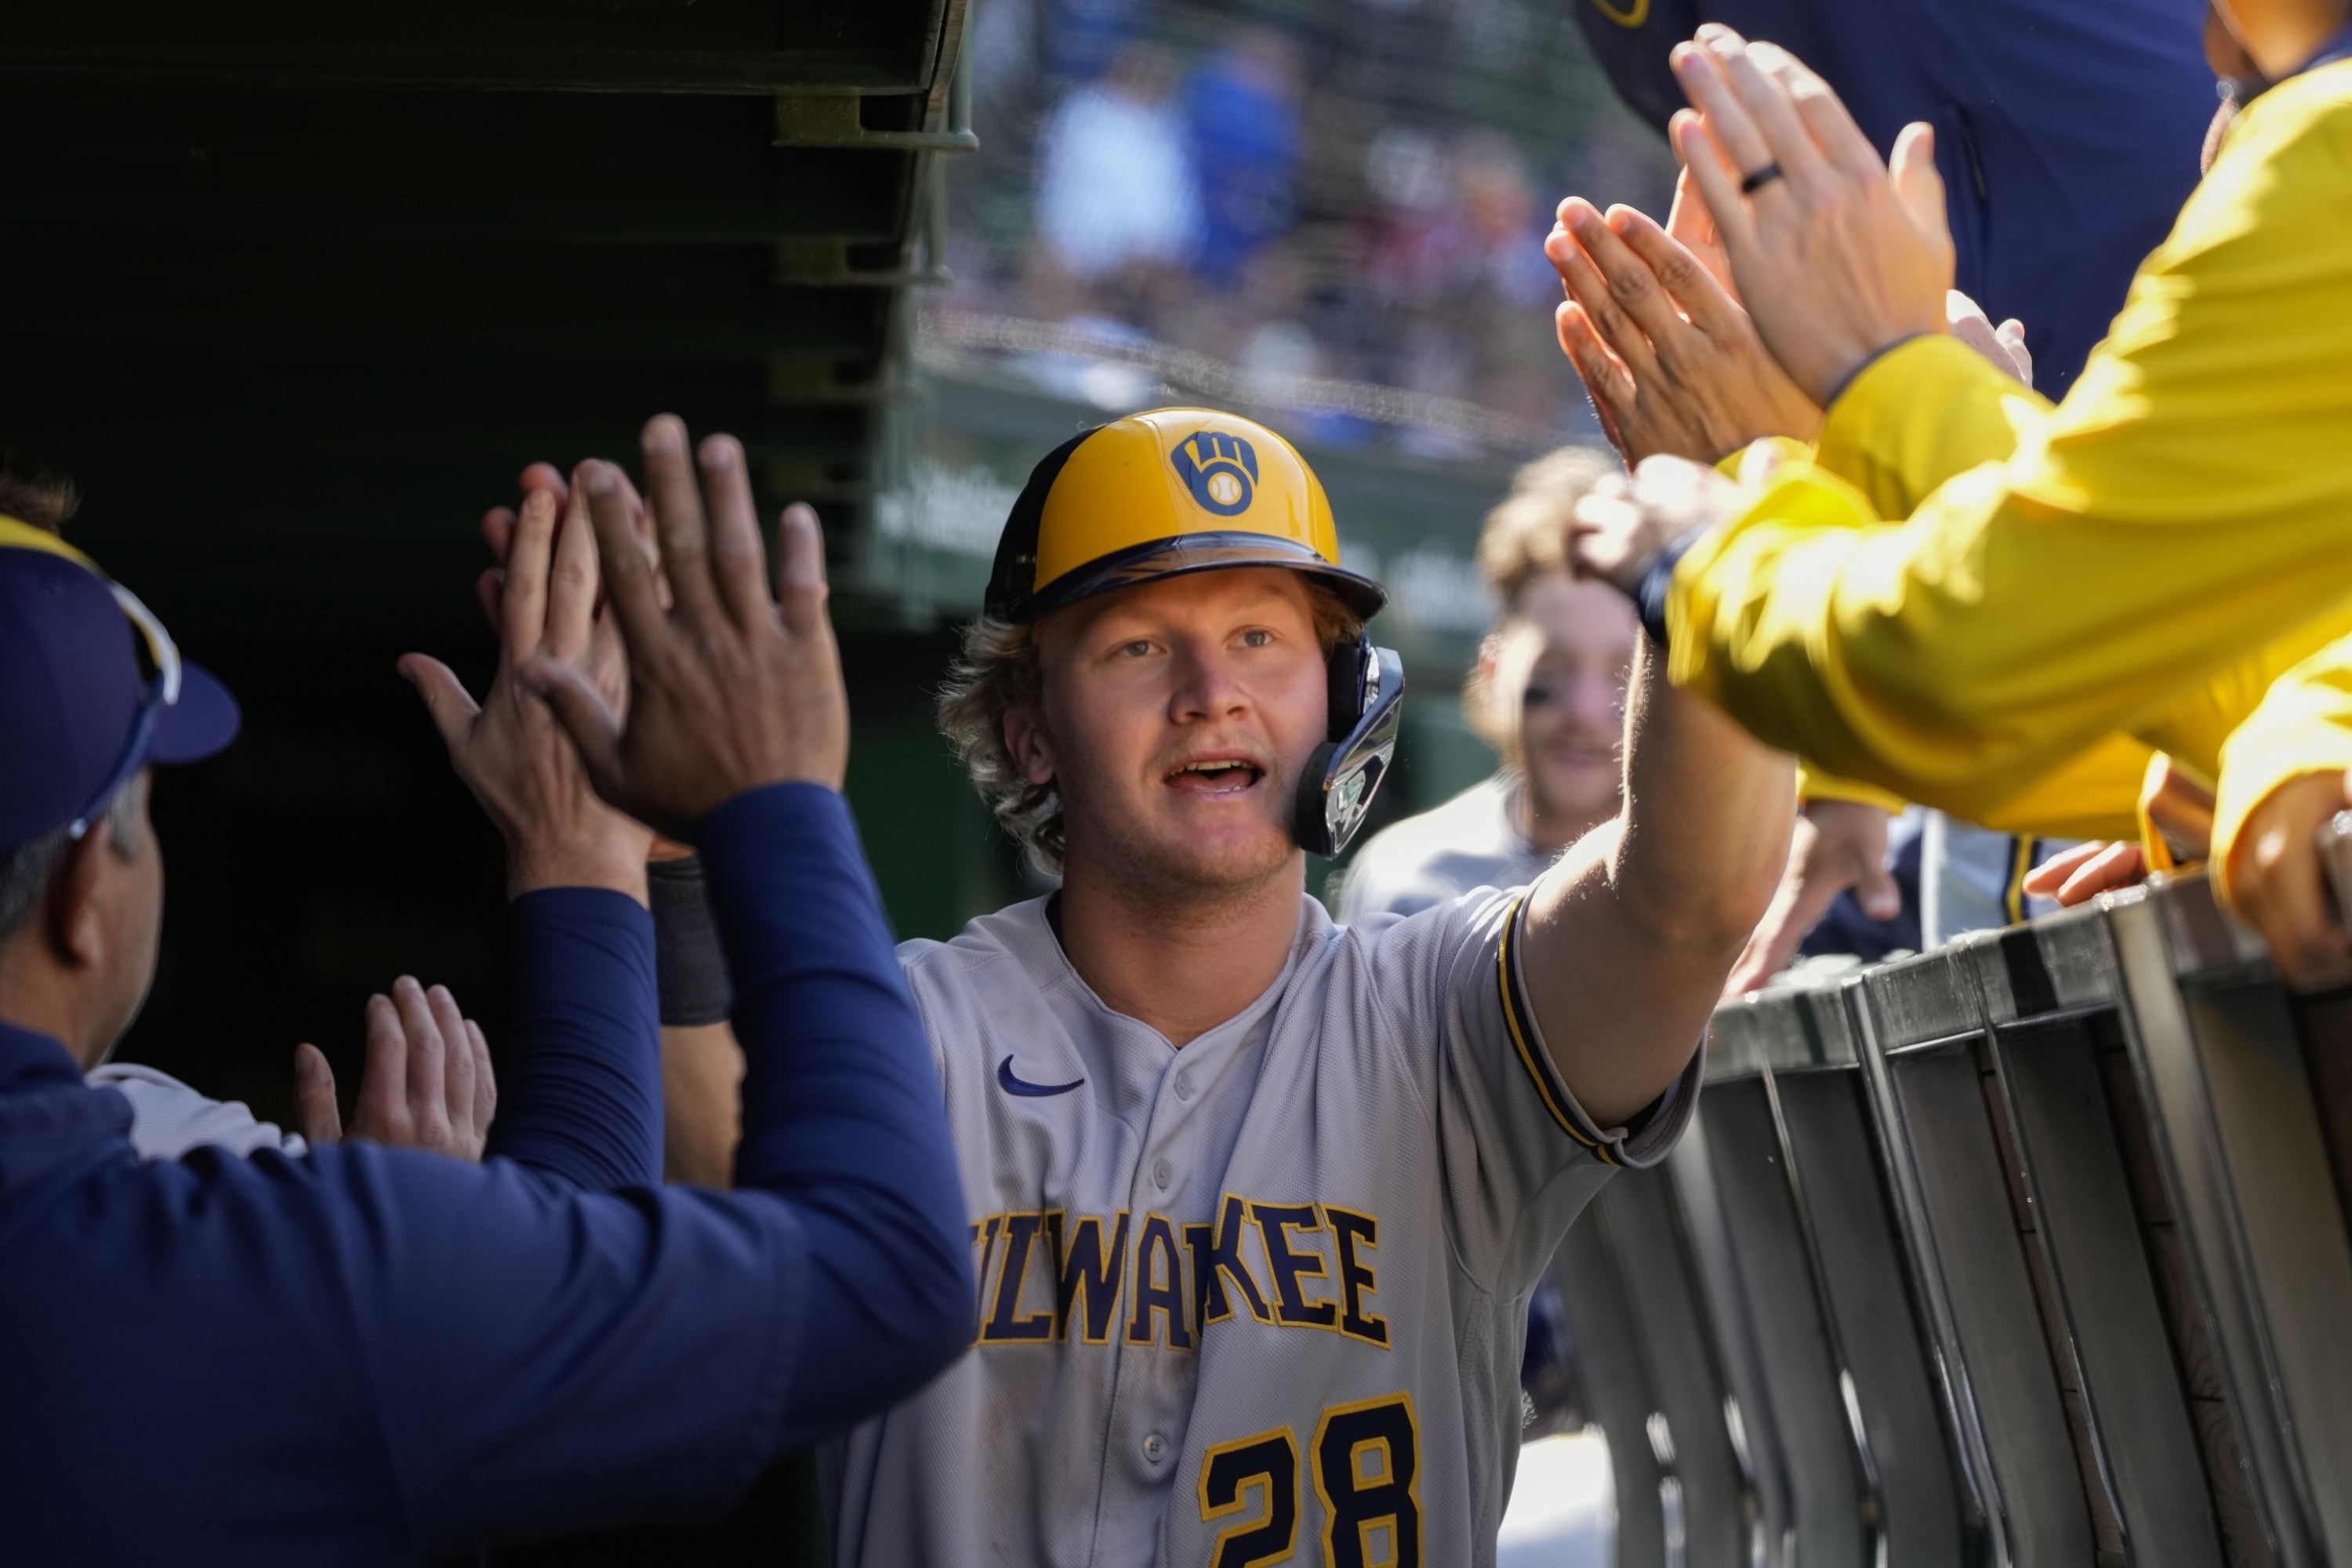 Winker drives in 3 as Brewers beat Taillon, Cubs 9-5